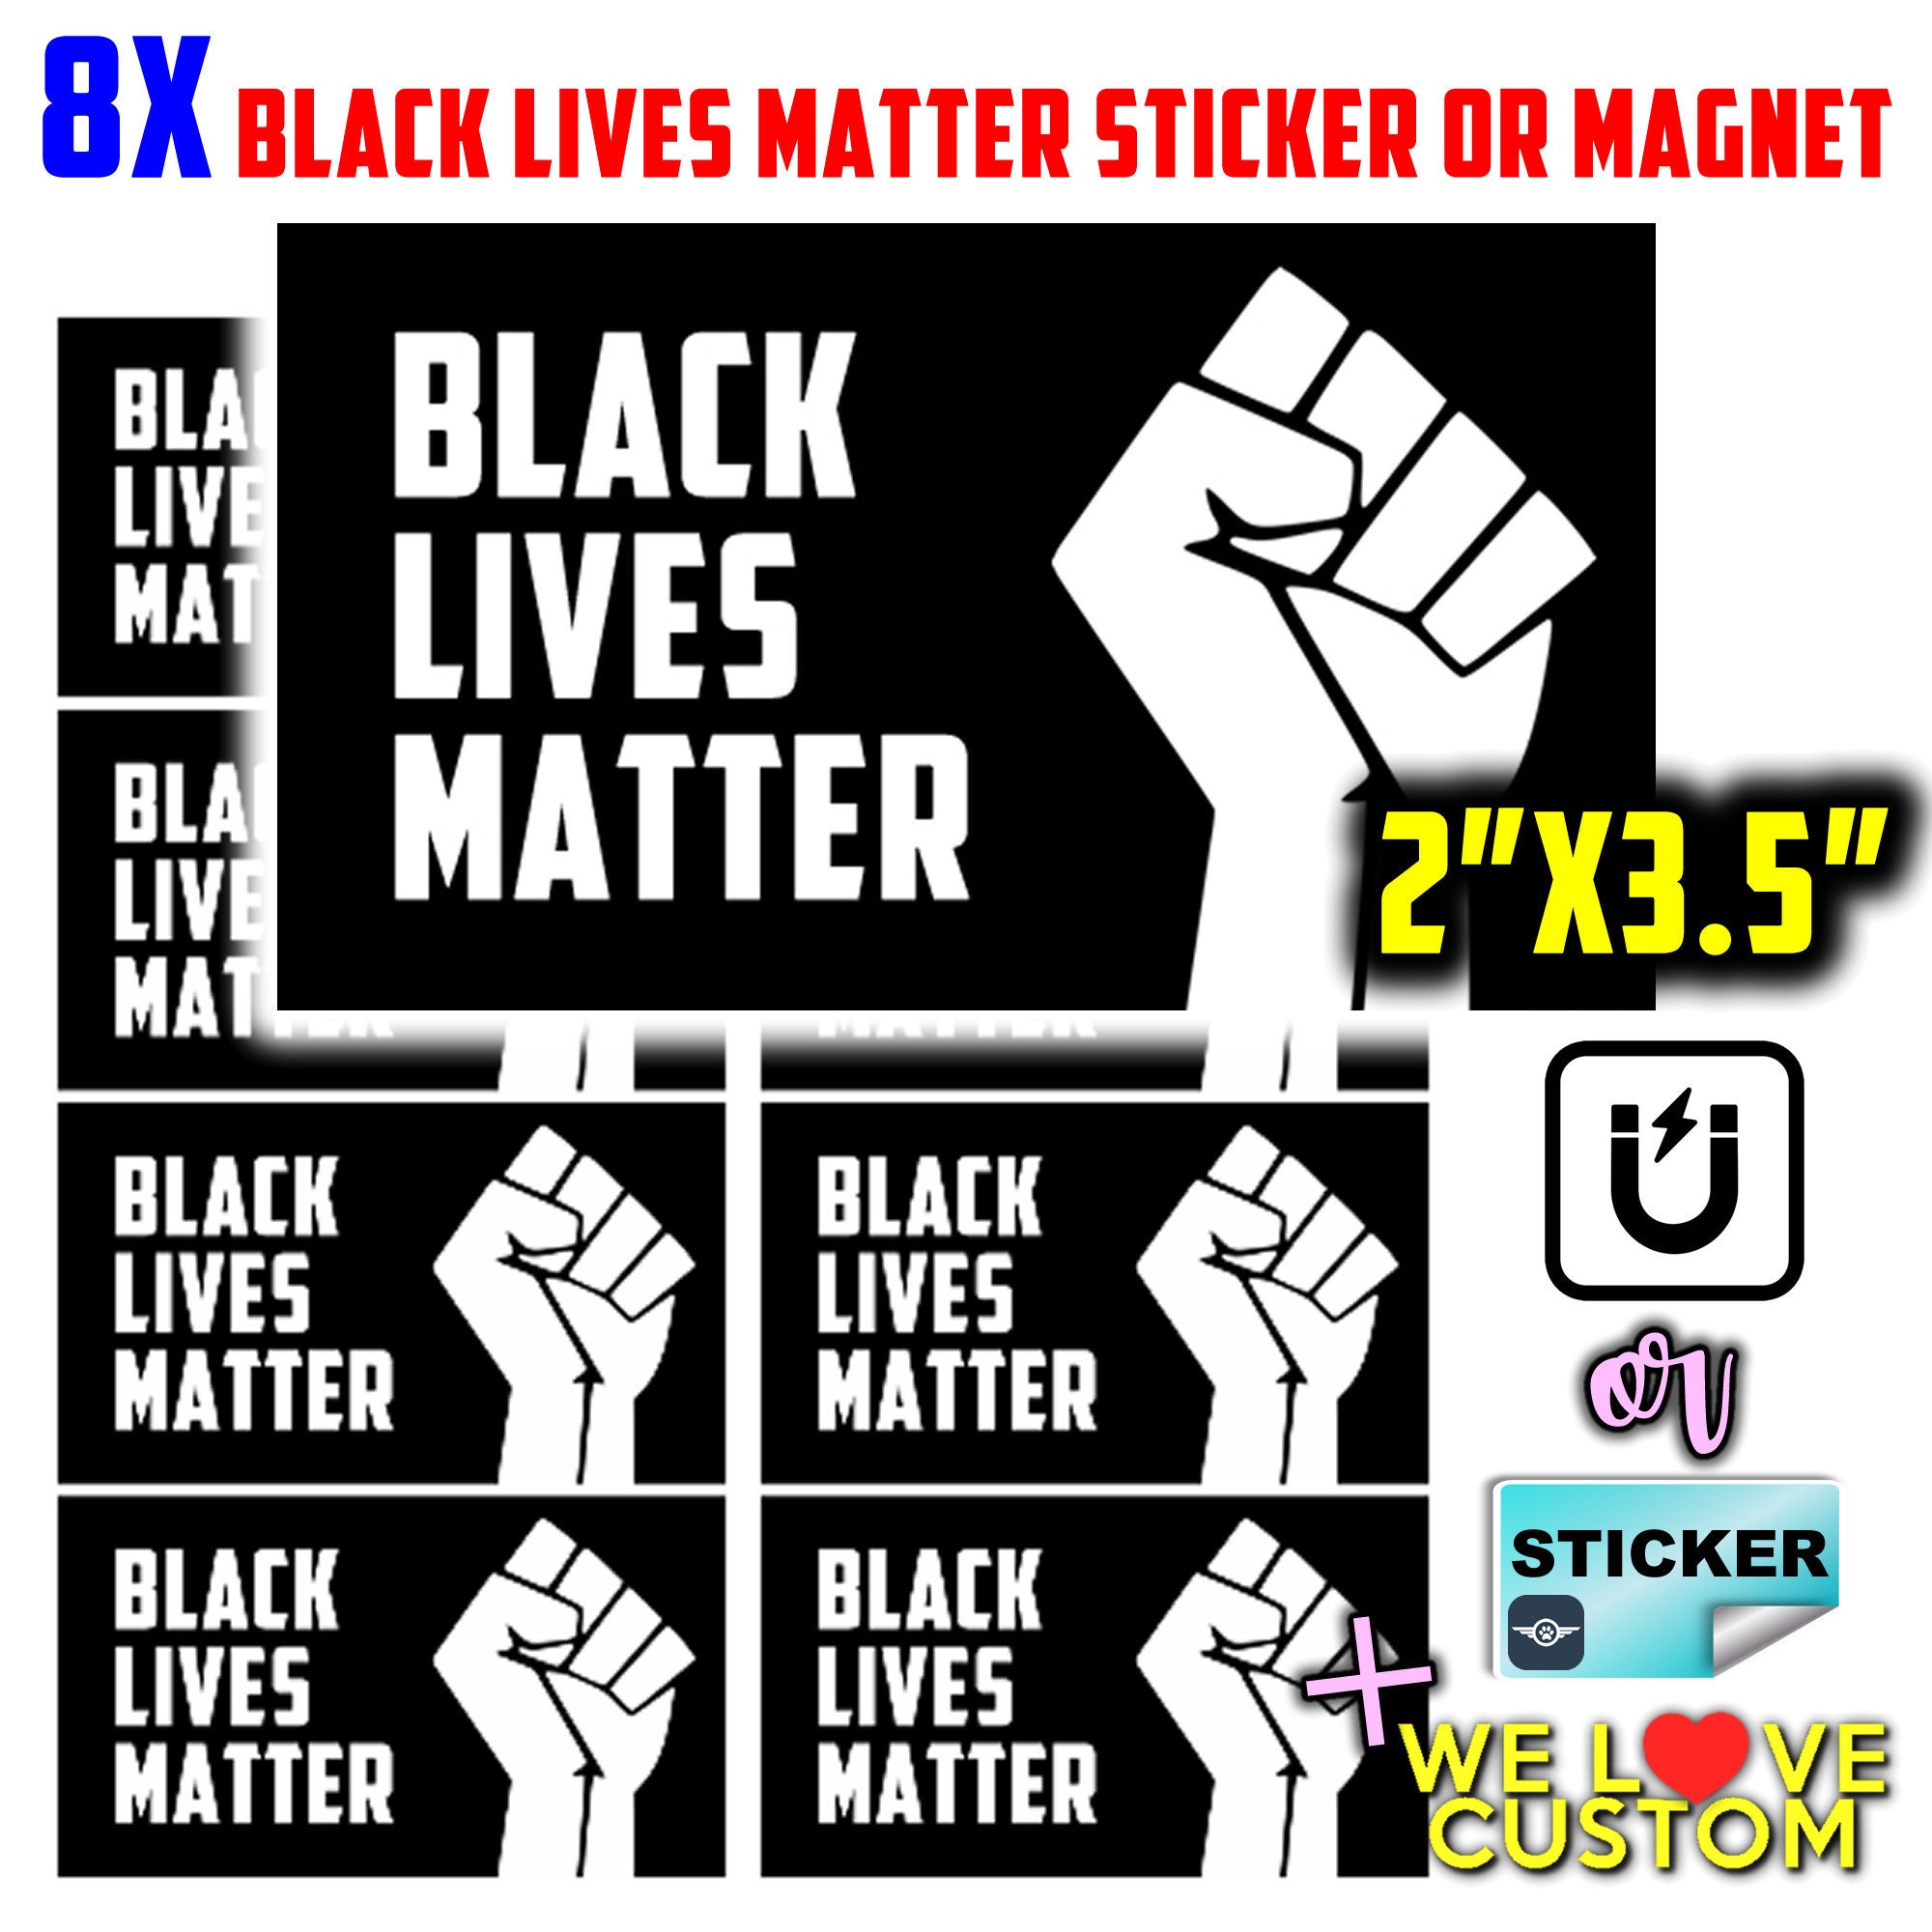 8x Black Lives Matter Stickers or Magnet in size 2